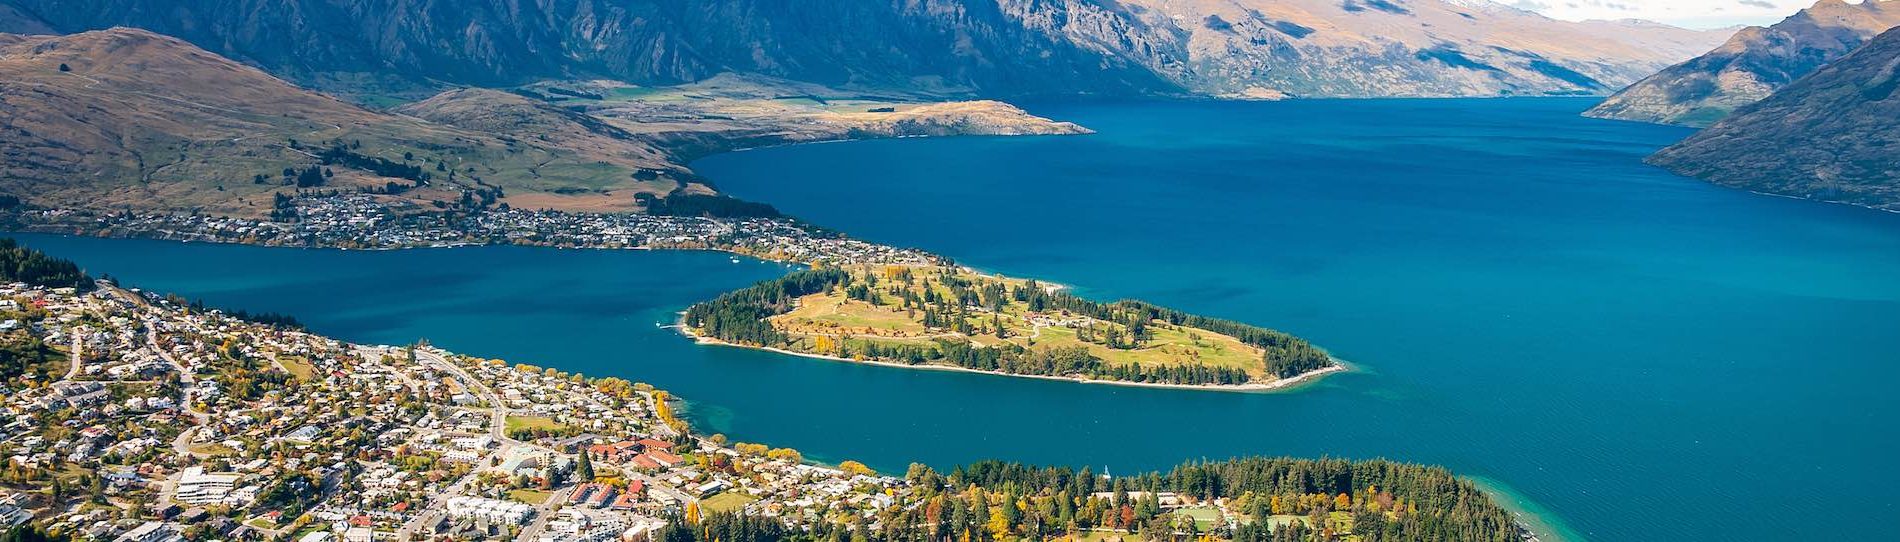 aerial view of queenstown city